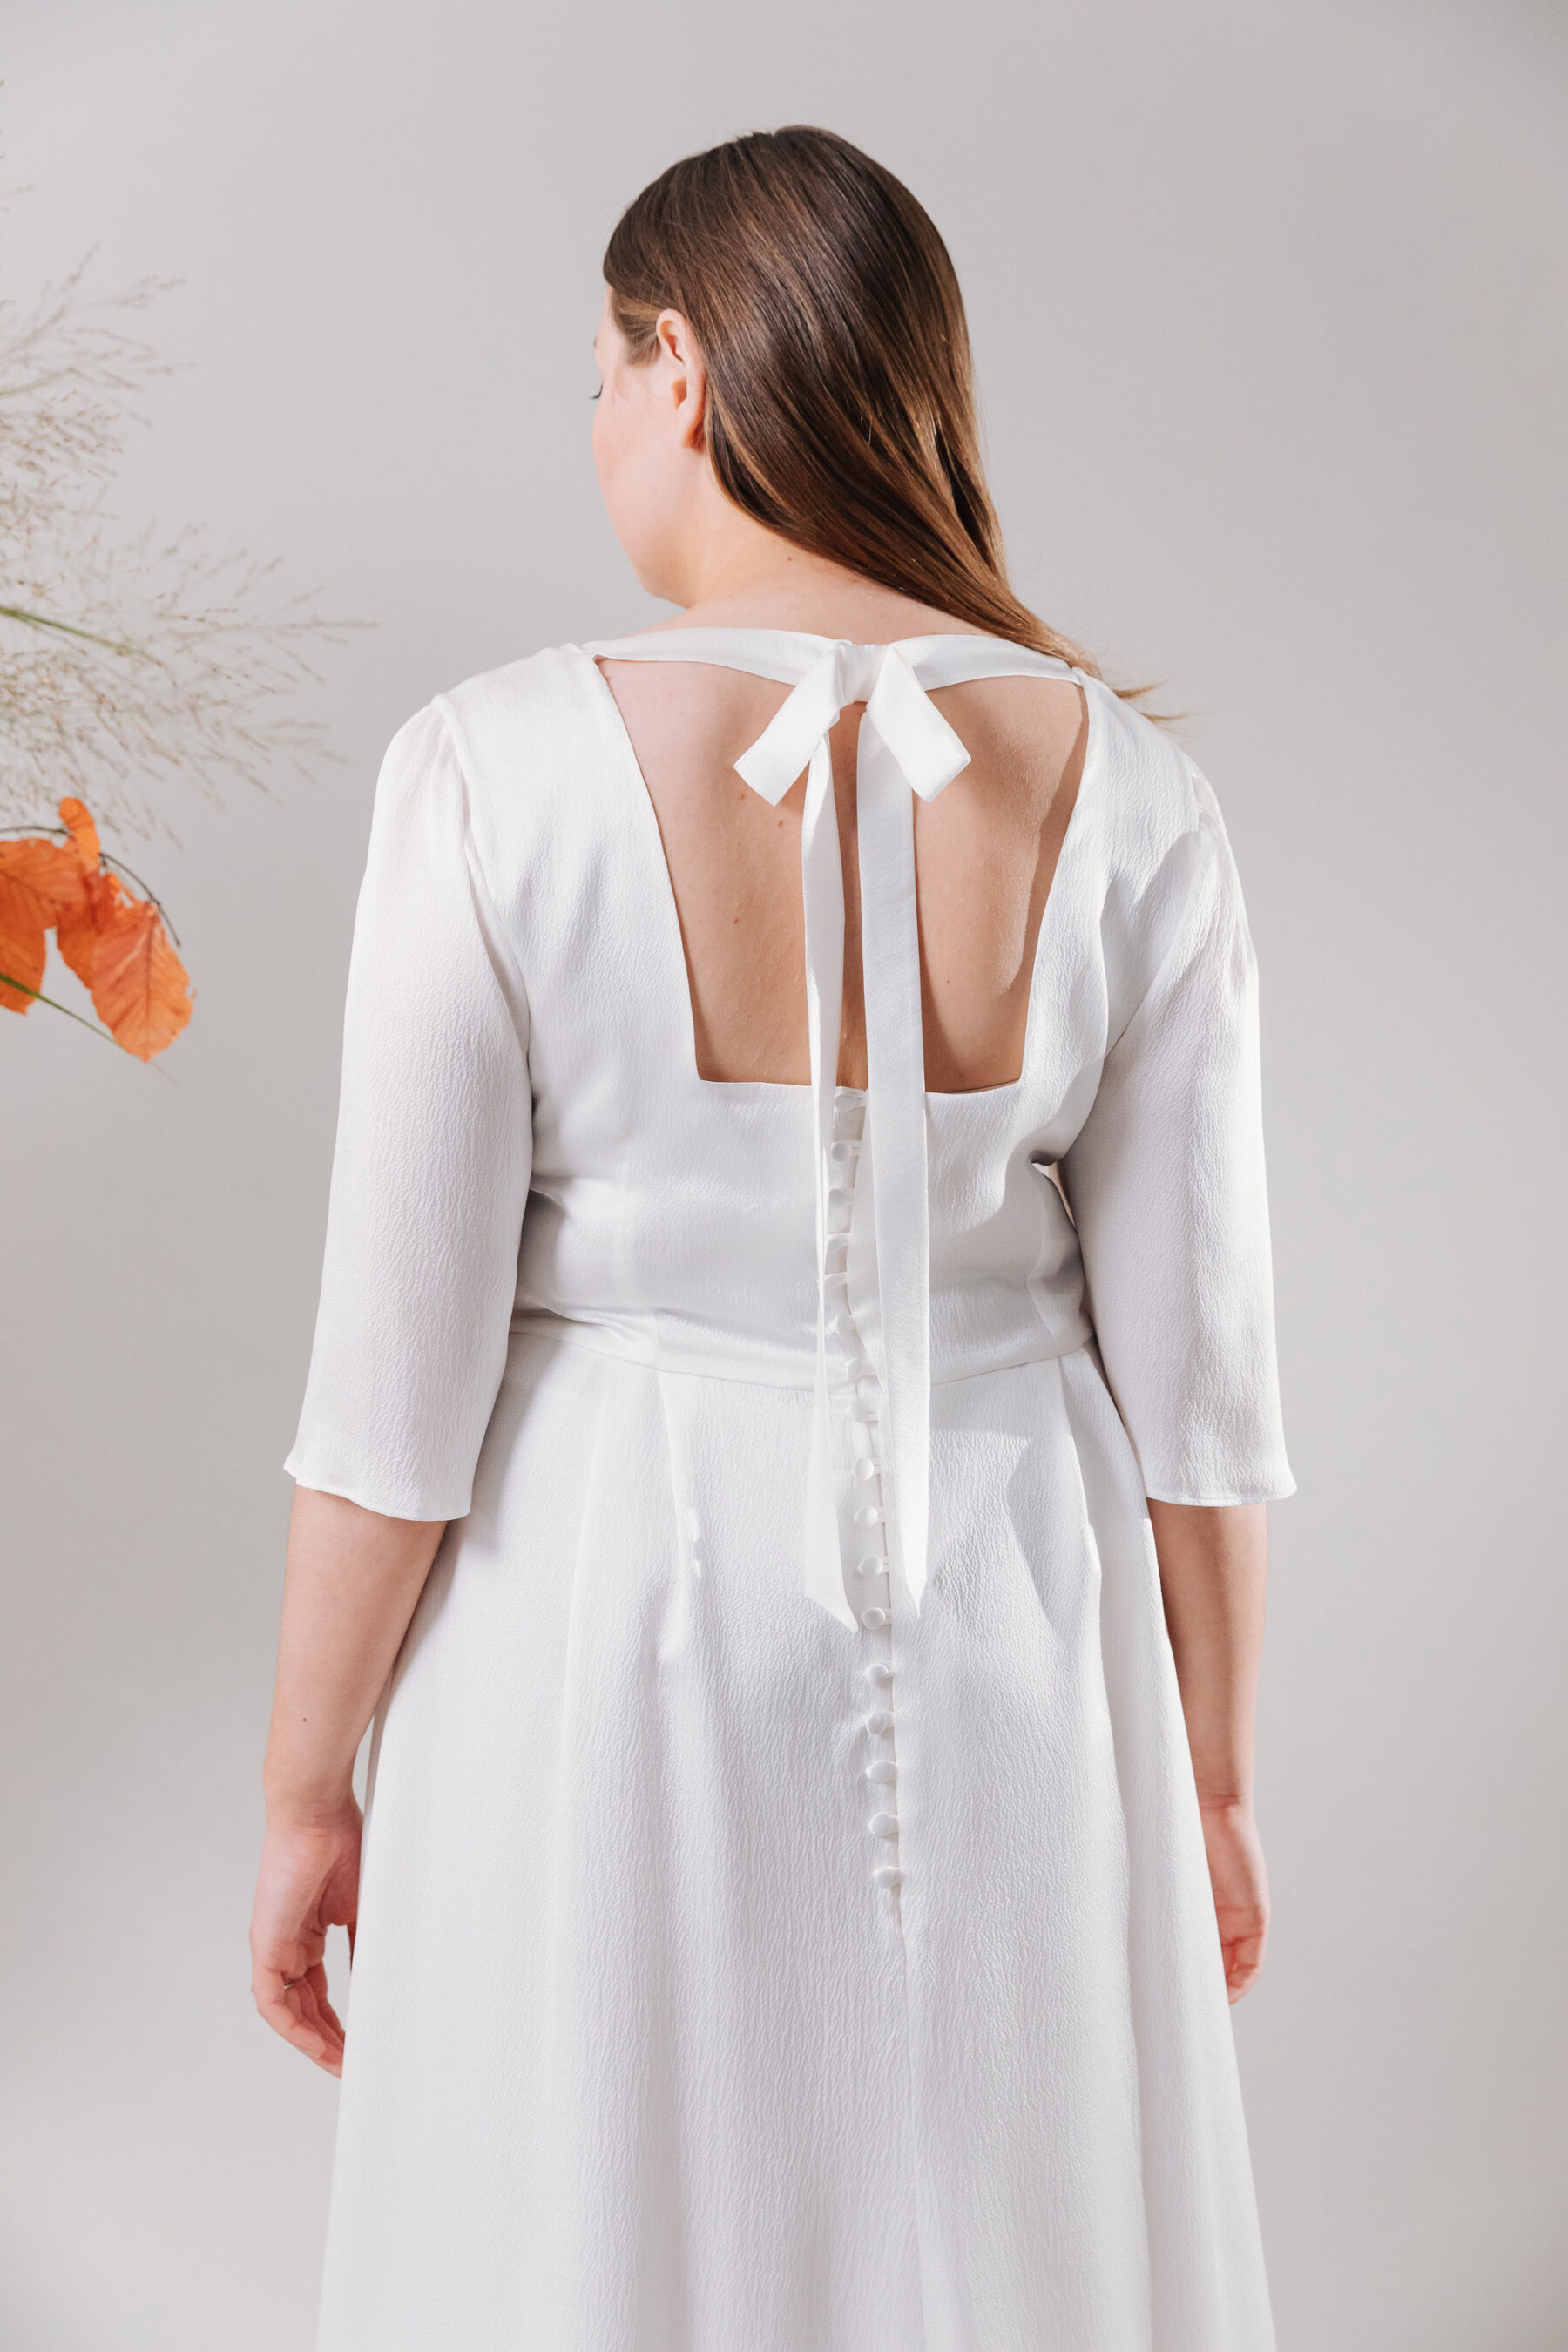 Kate Beaumont sustainable wedding dress for curvy brides. Bridal gown for fuller figured women.